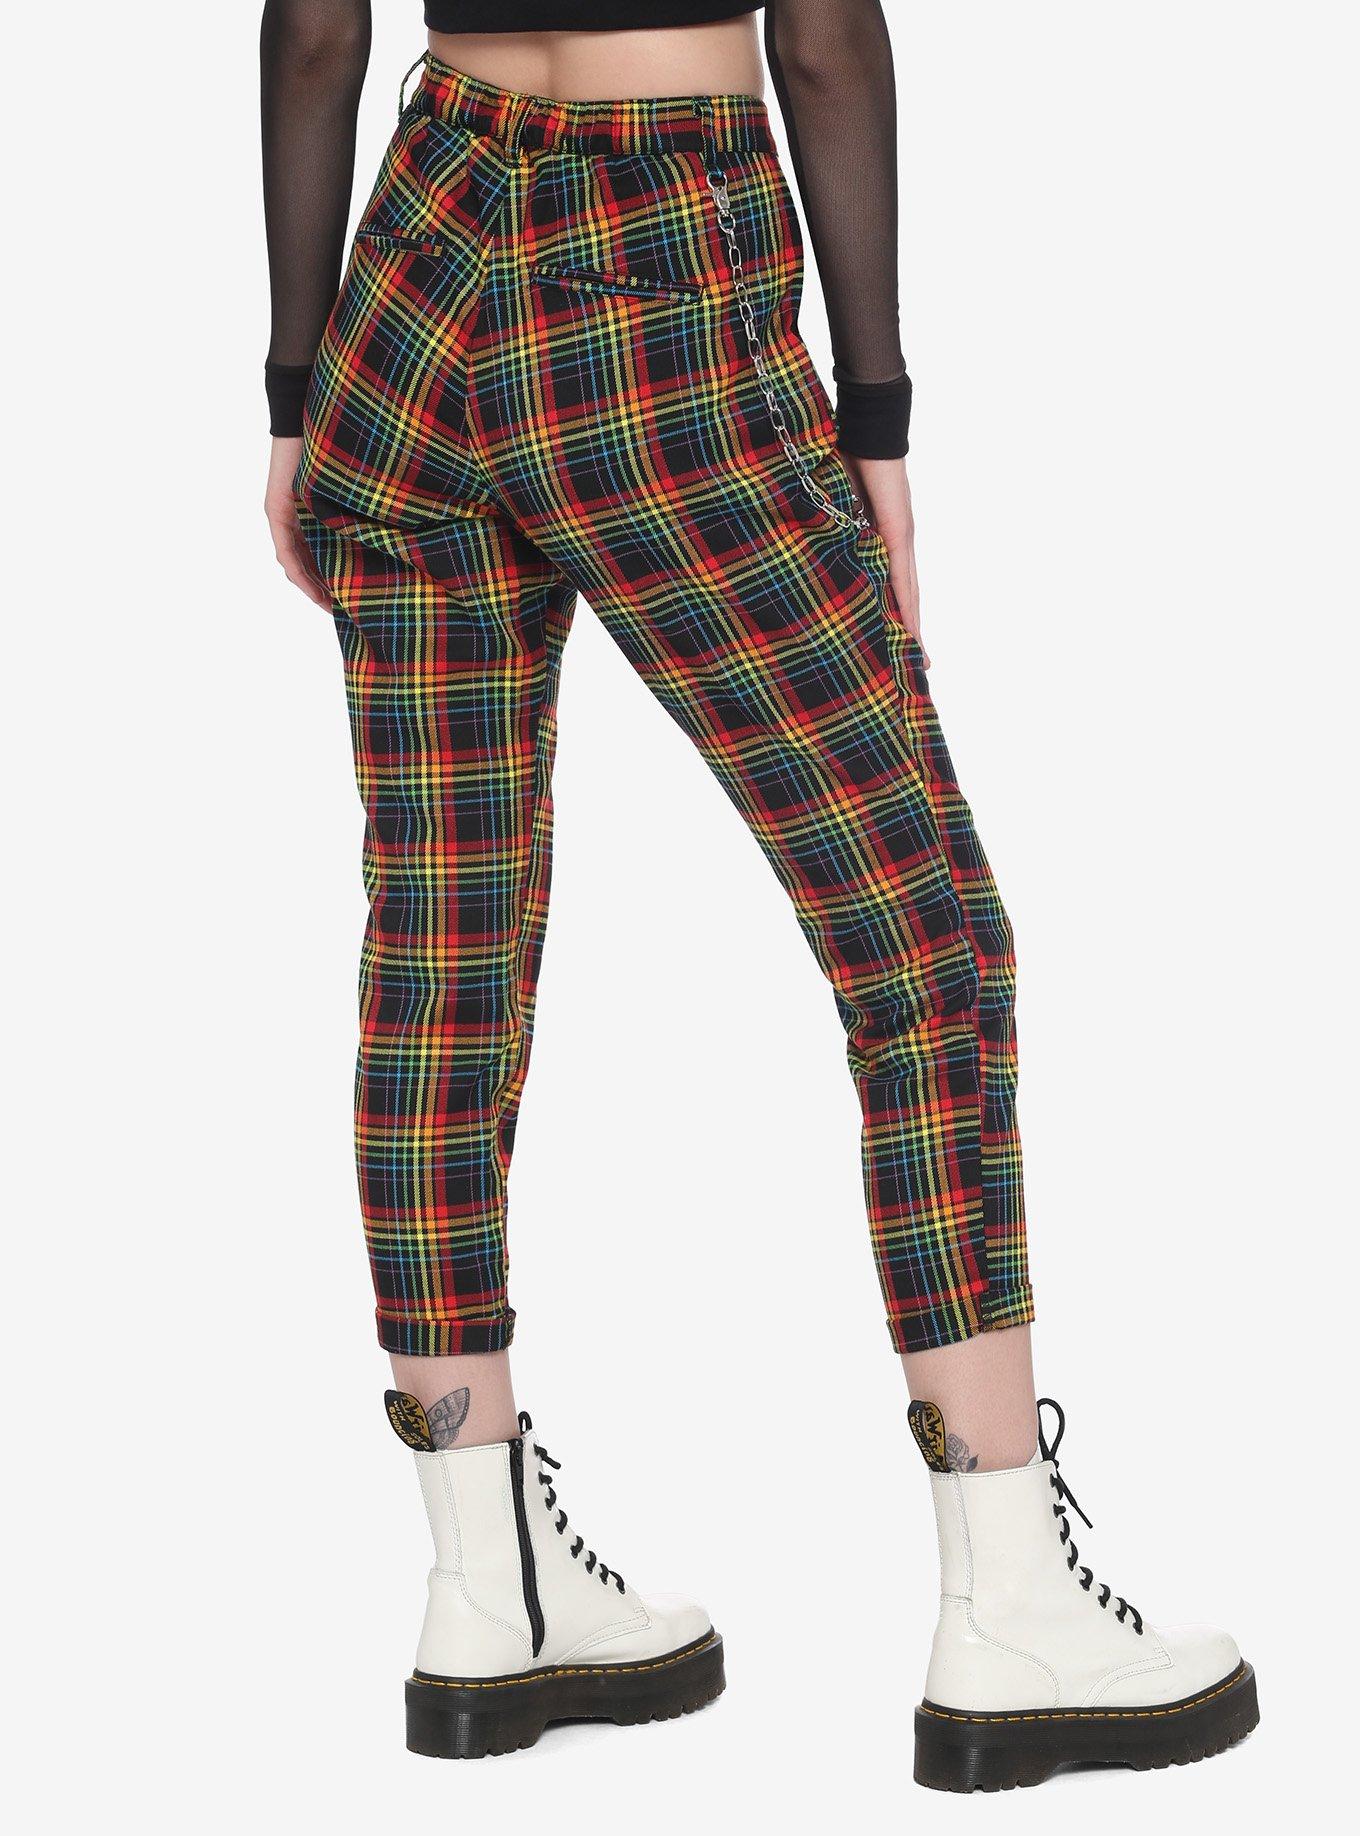 Hot Topic Rainbow Grid Pants With Detachable Chain Plus